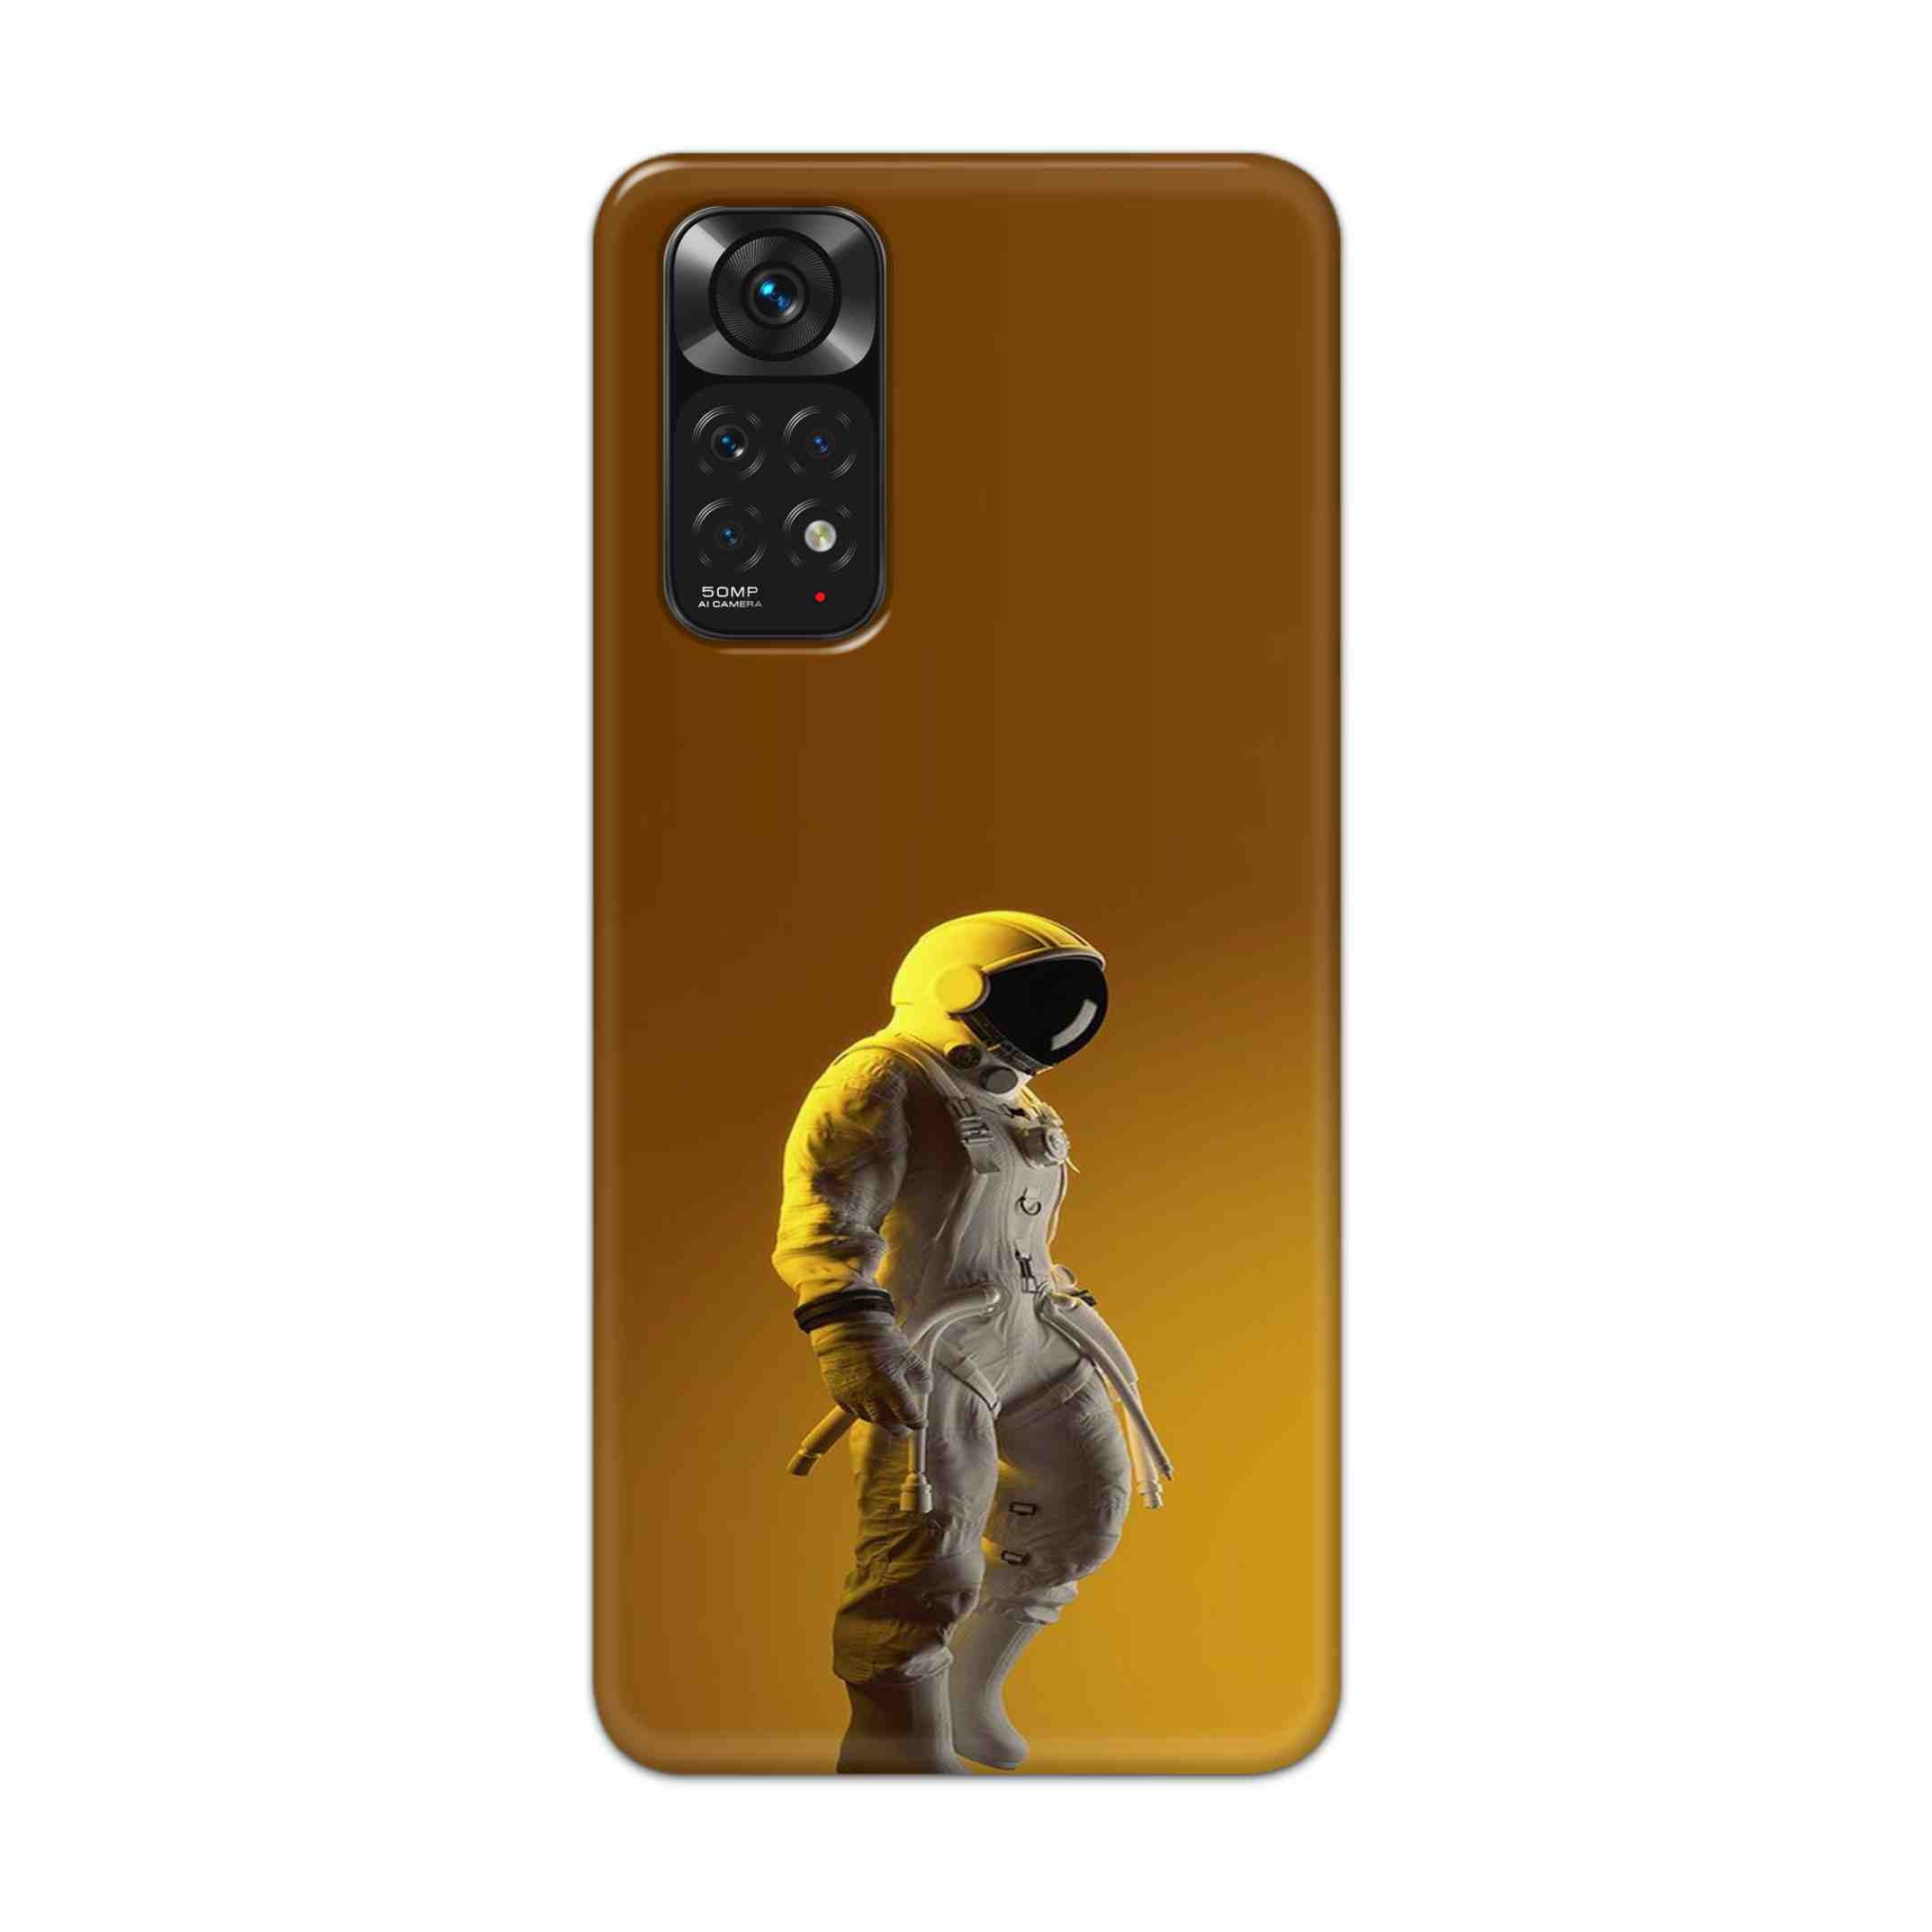 Buy Yellow Astronaut Hard Back Mobile Phone Case Cover For Redmi Note 11 Online